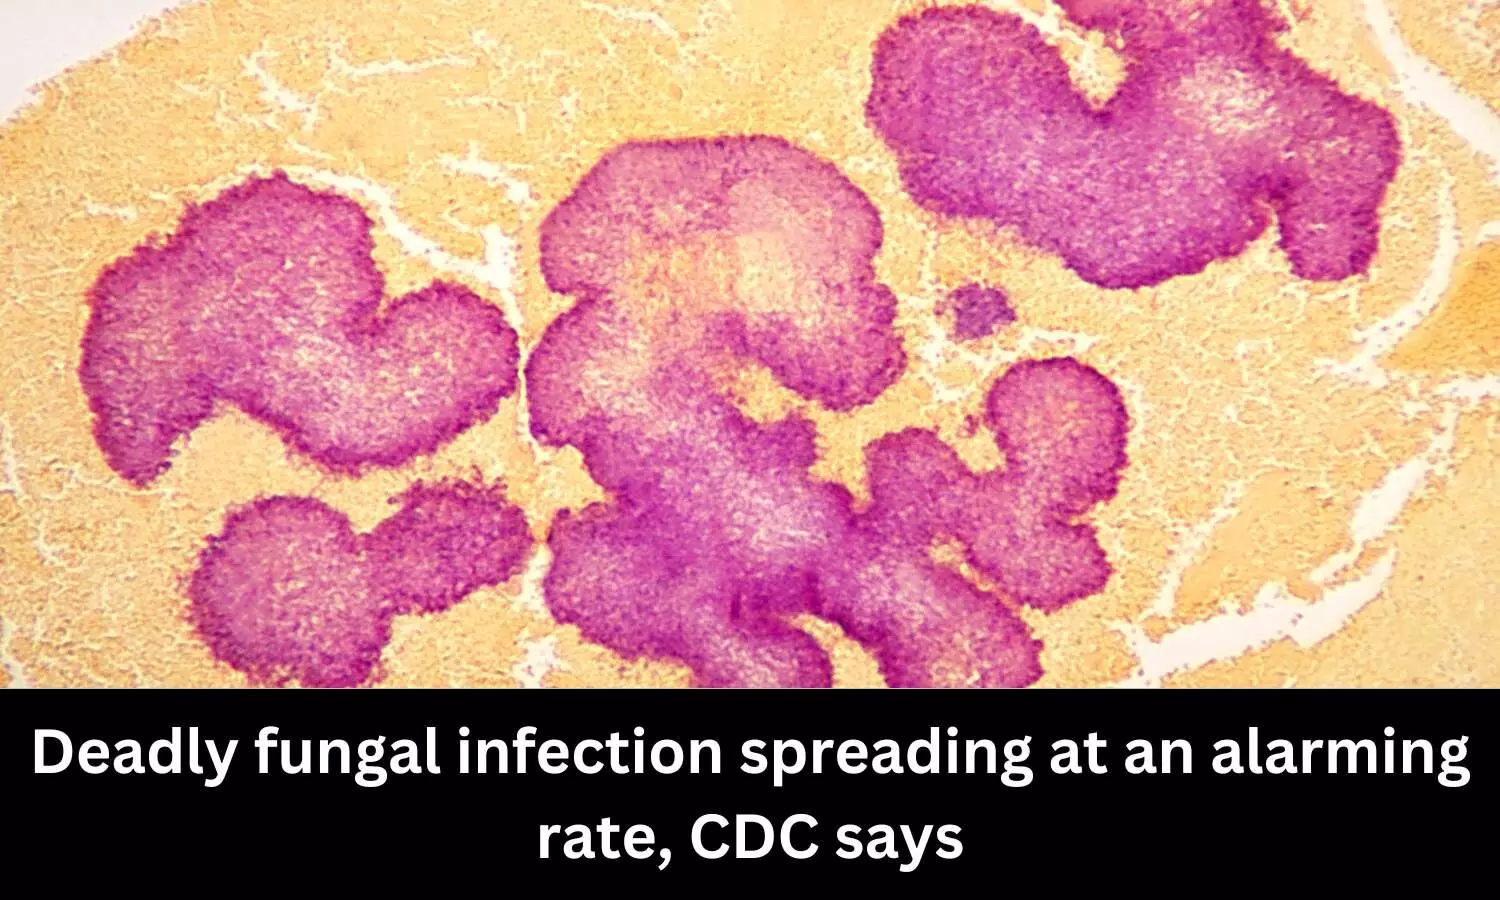 Deadly fungal infection spreading at alarming rate: CDC